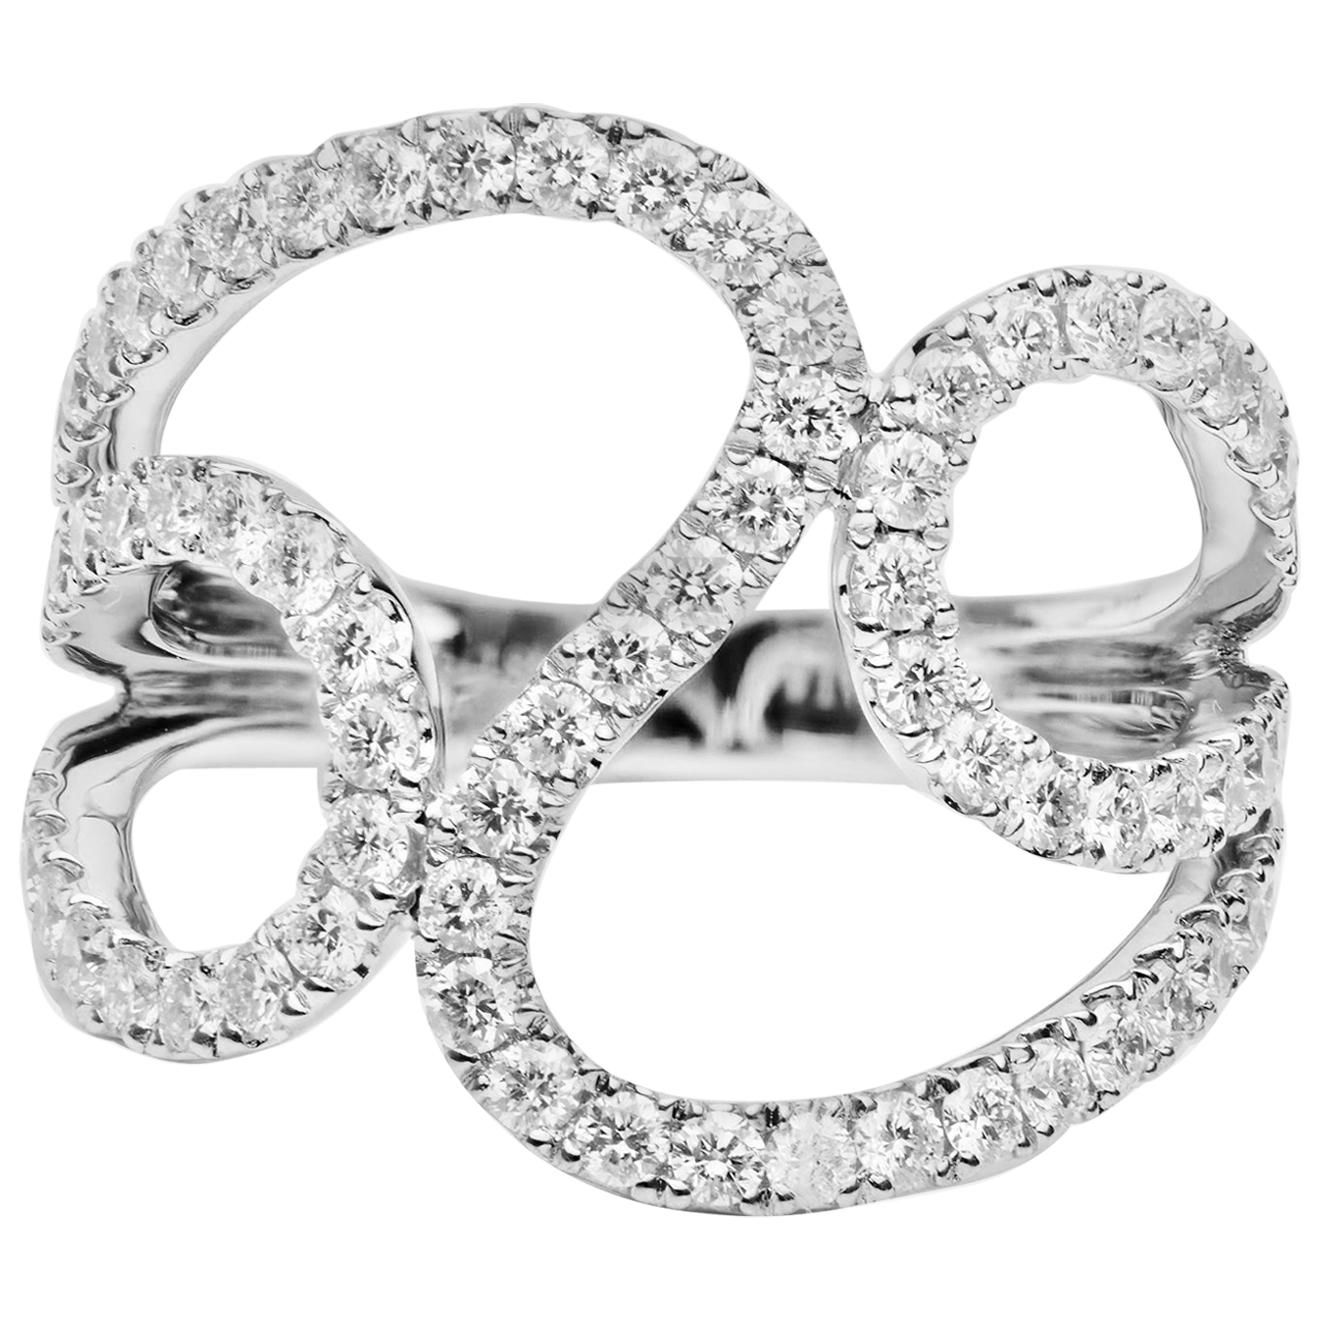 What is a swirl engagement ring?